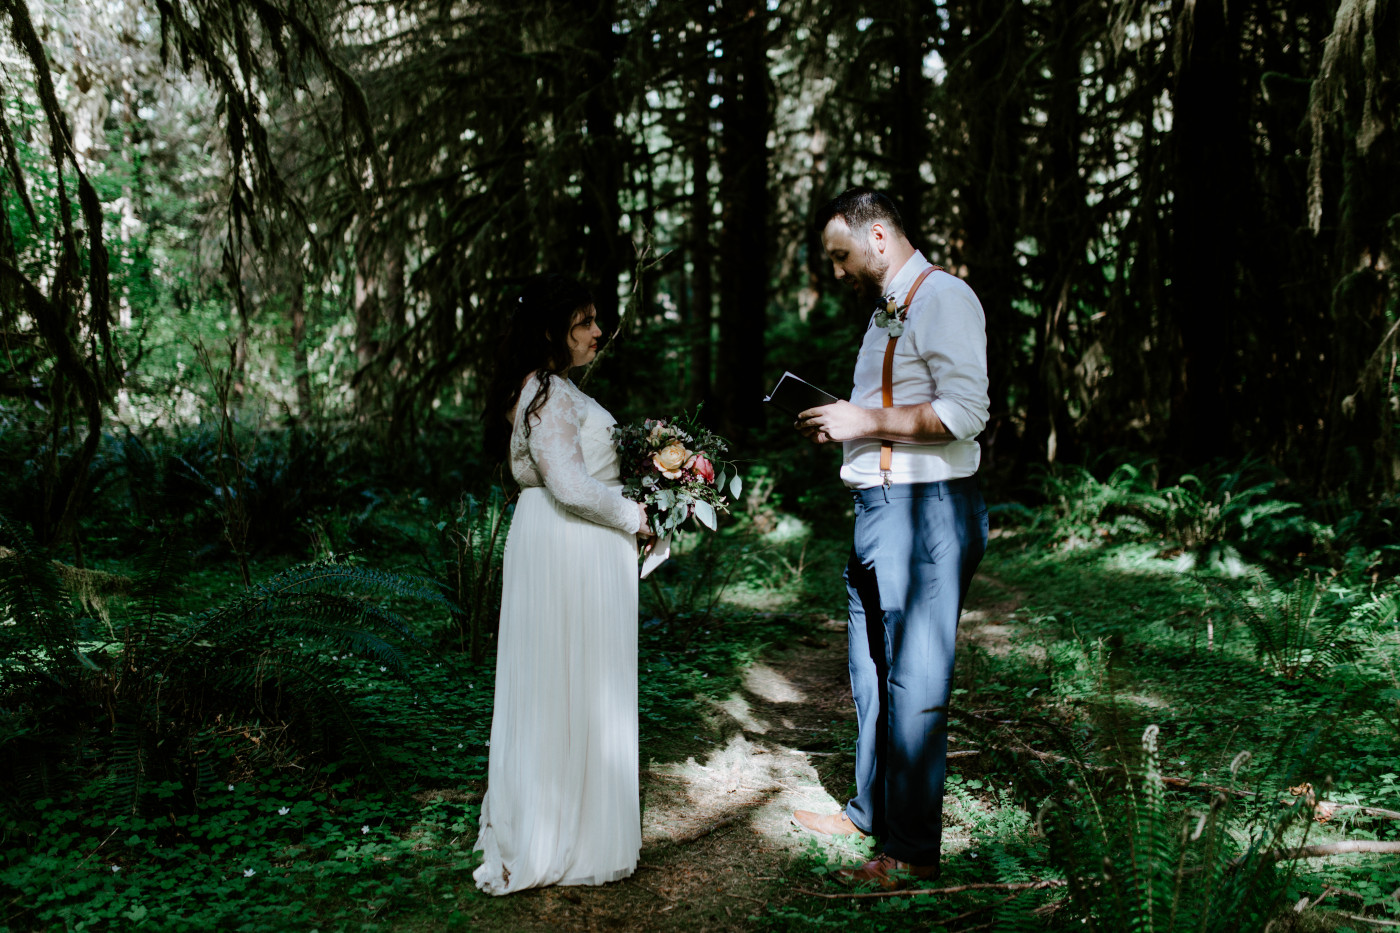 Jack and Brooke at their elopement ceremony. Elopement photography at Olympic National Park by Sienna Plus Josh.